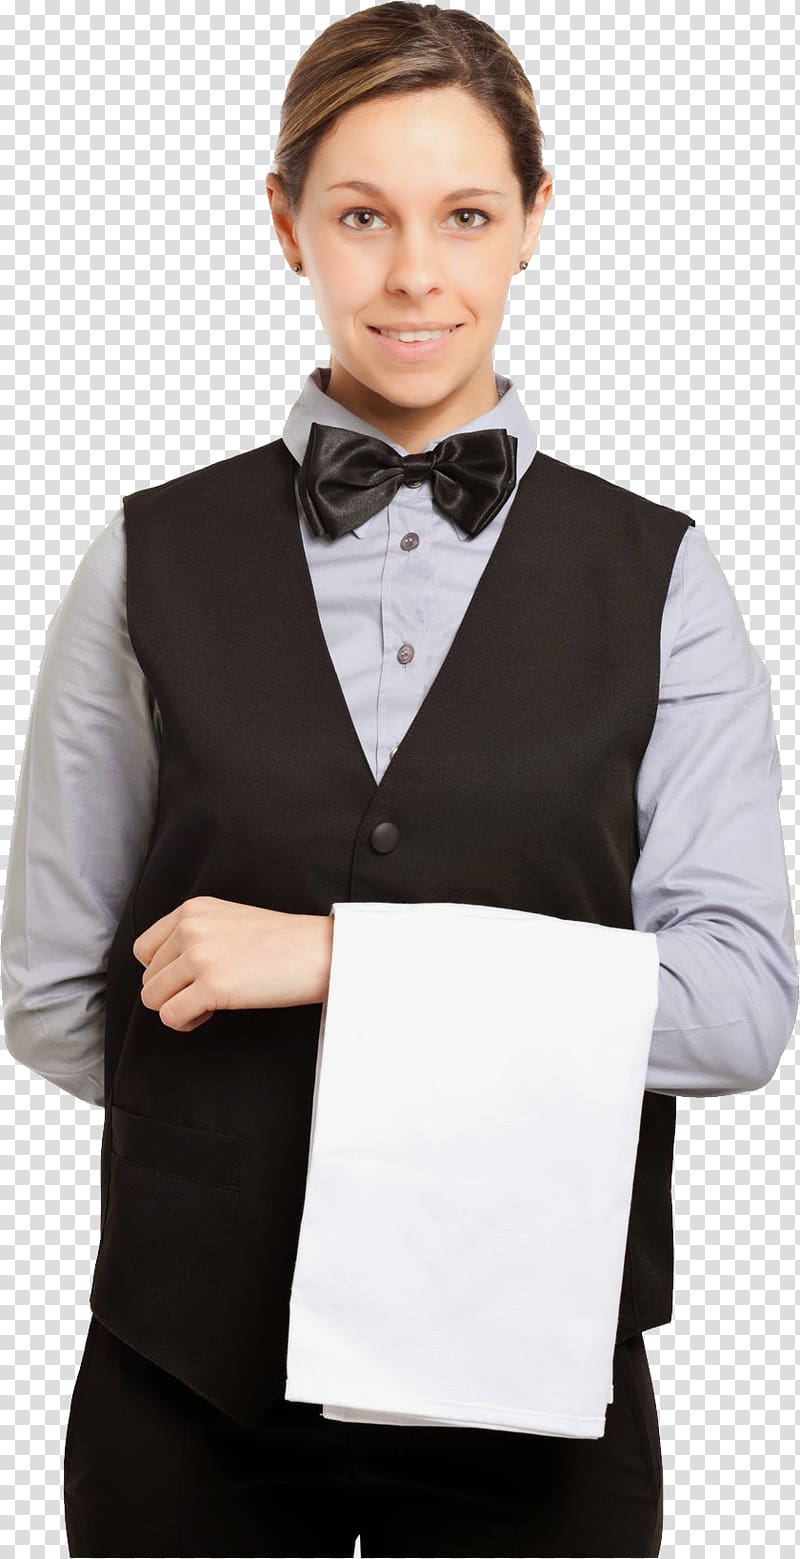 Others transparent background png. Waitress clipart male waiter